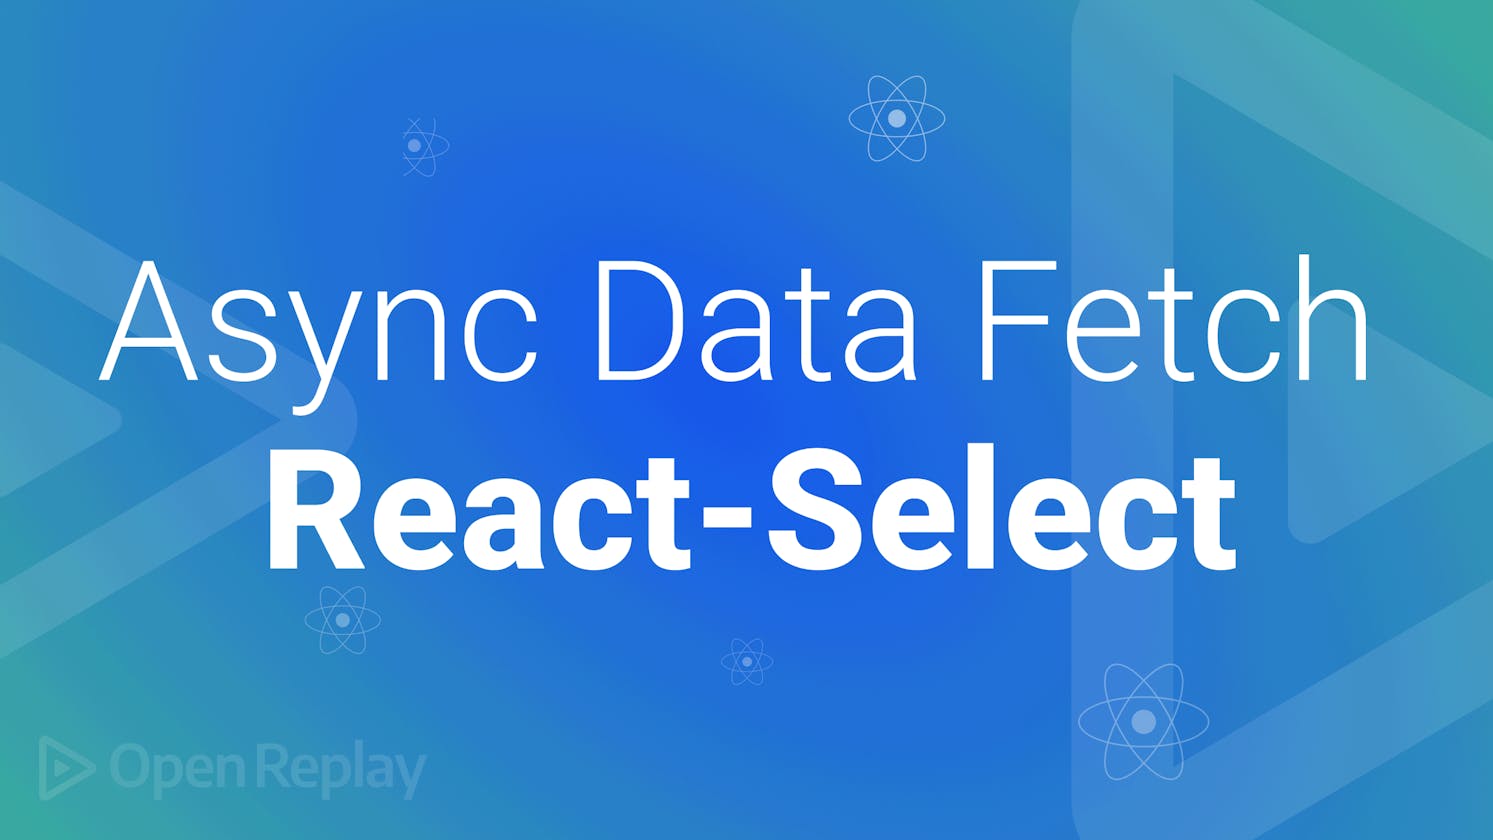 Async Data Fetching with React-Select